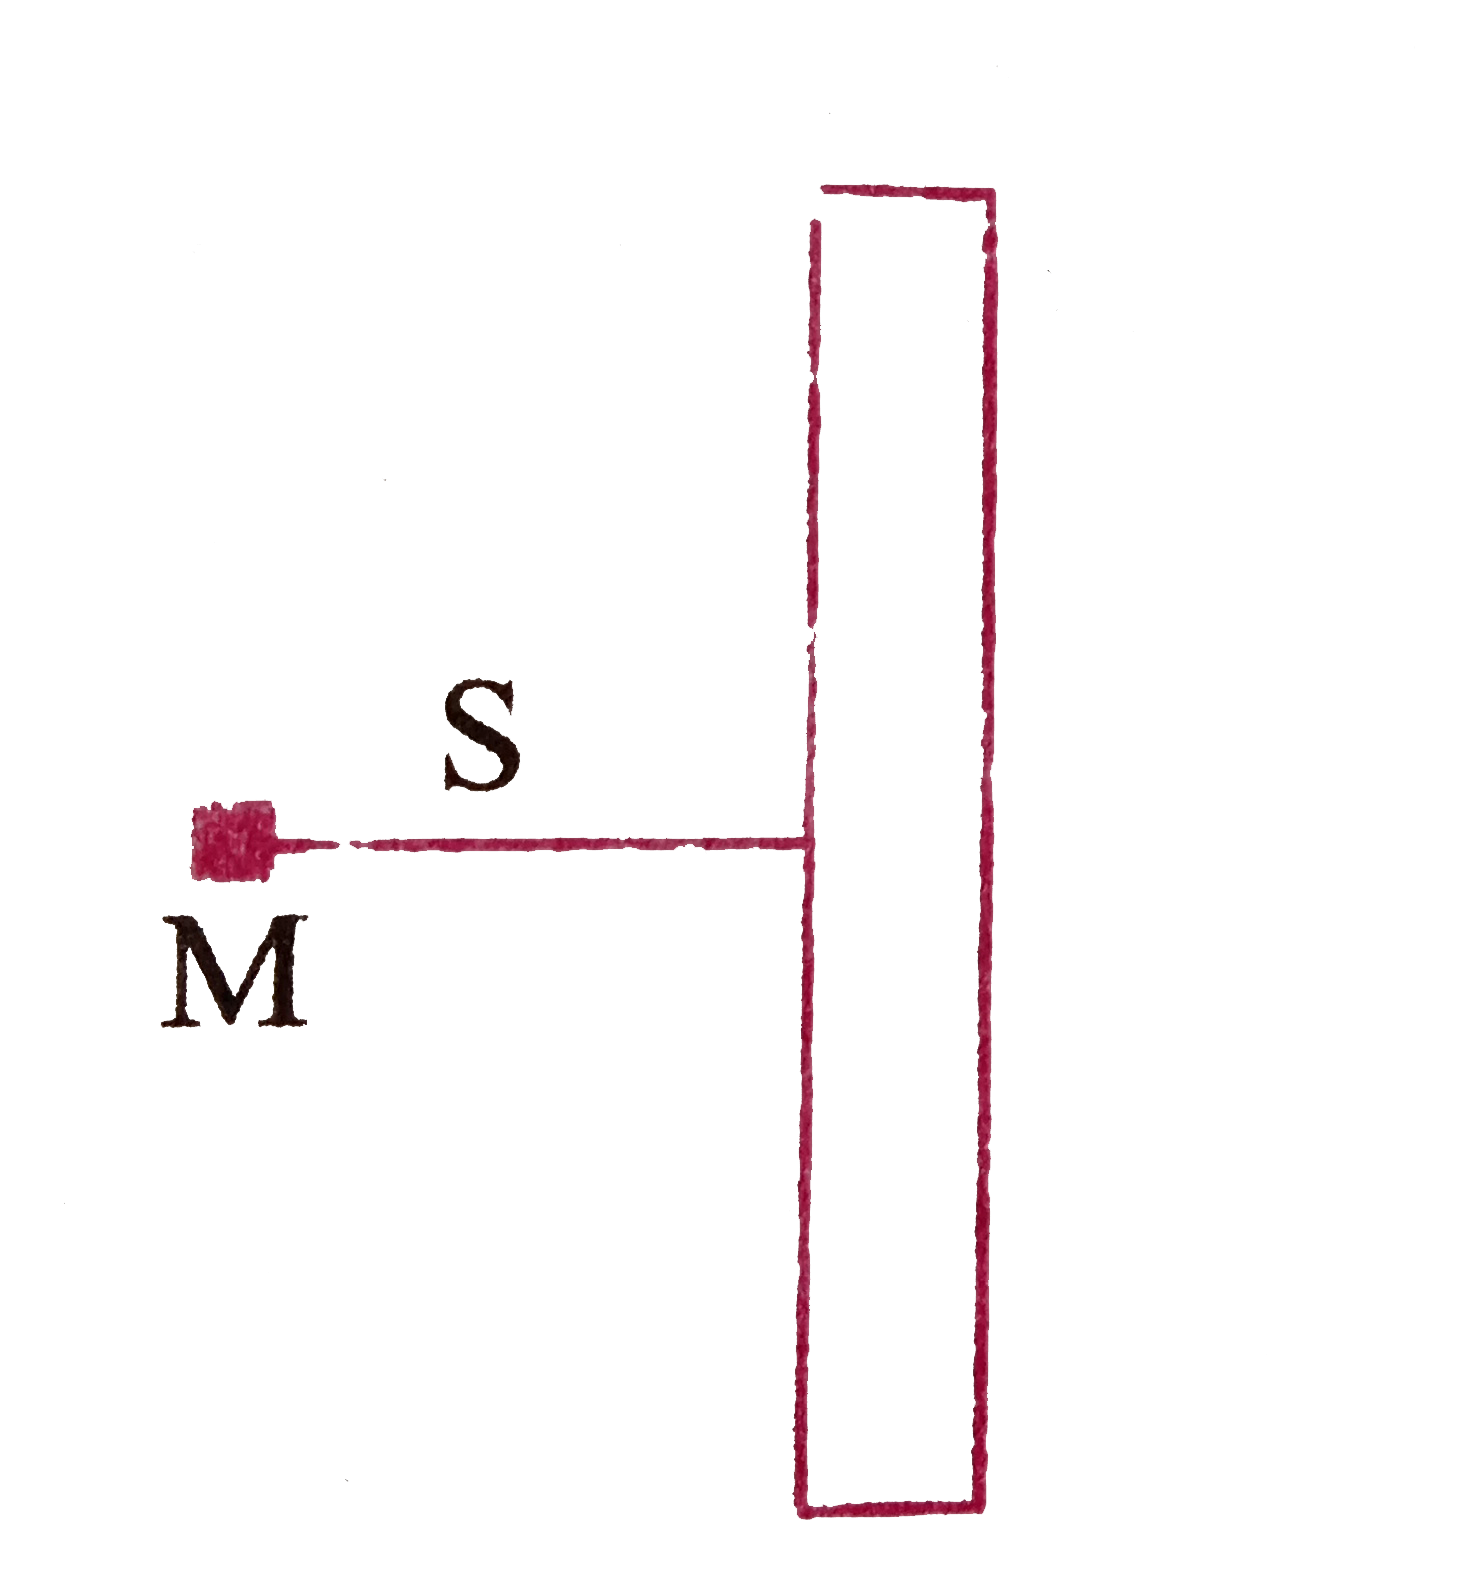 A point mass M is at a distance S from an infinitely long and thin rod of linear density D. If G is the gravitational constant then gravitational force between the point mass and the rod is